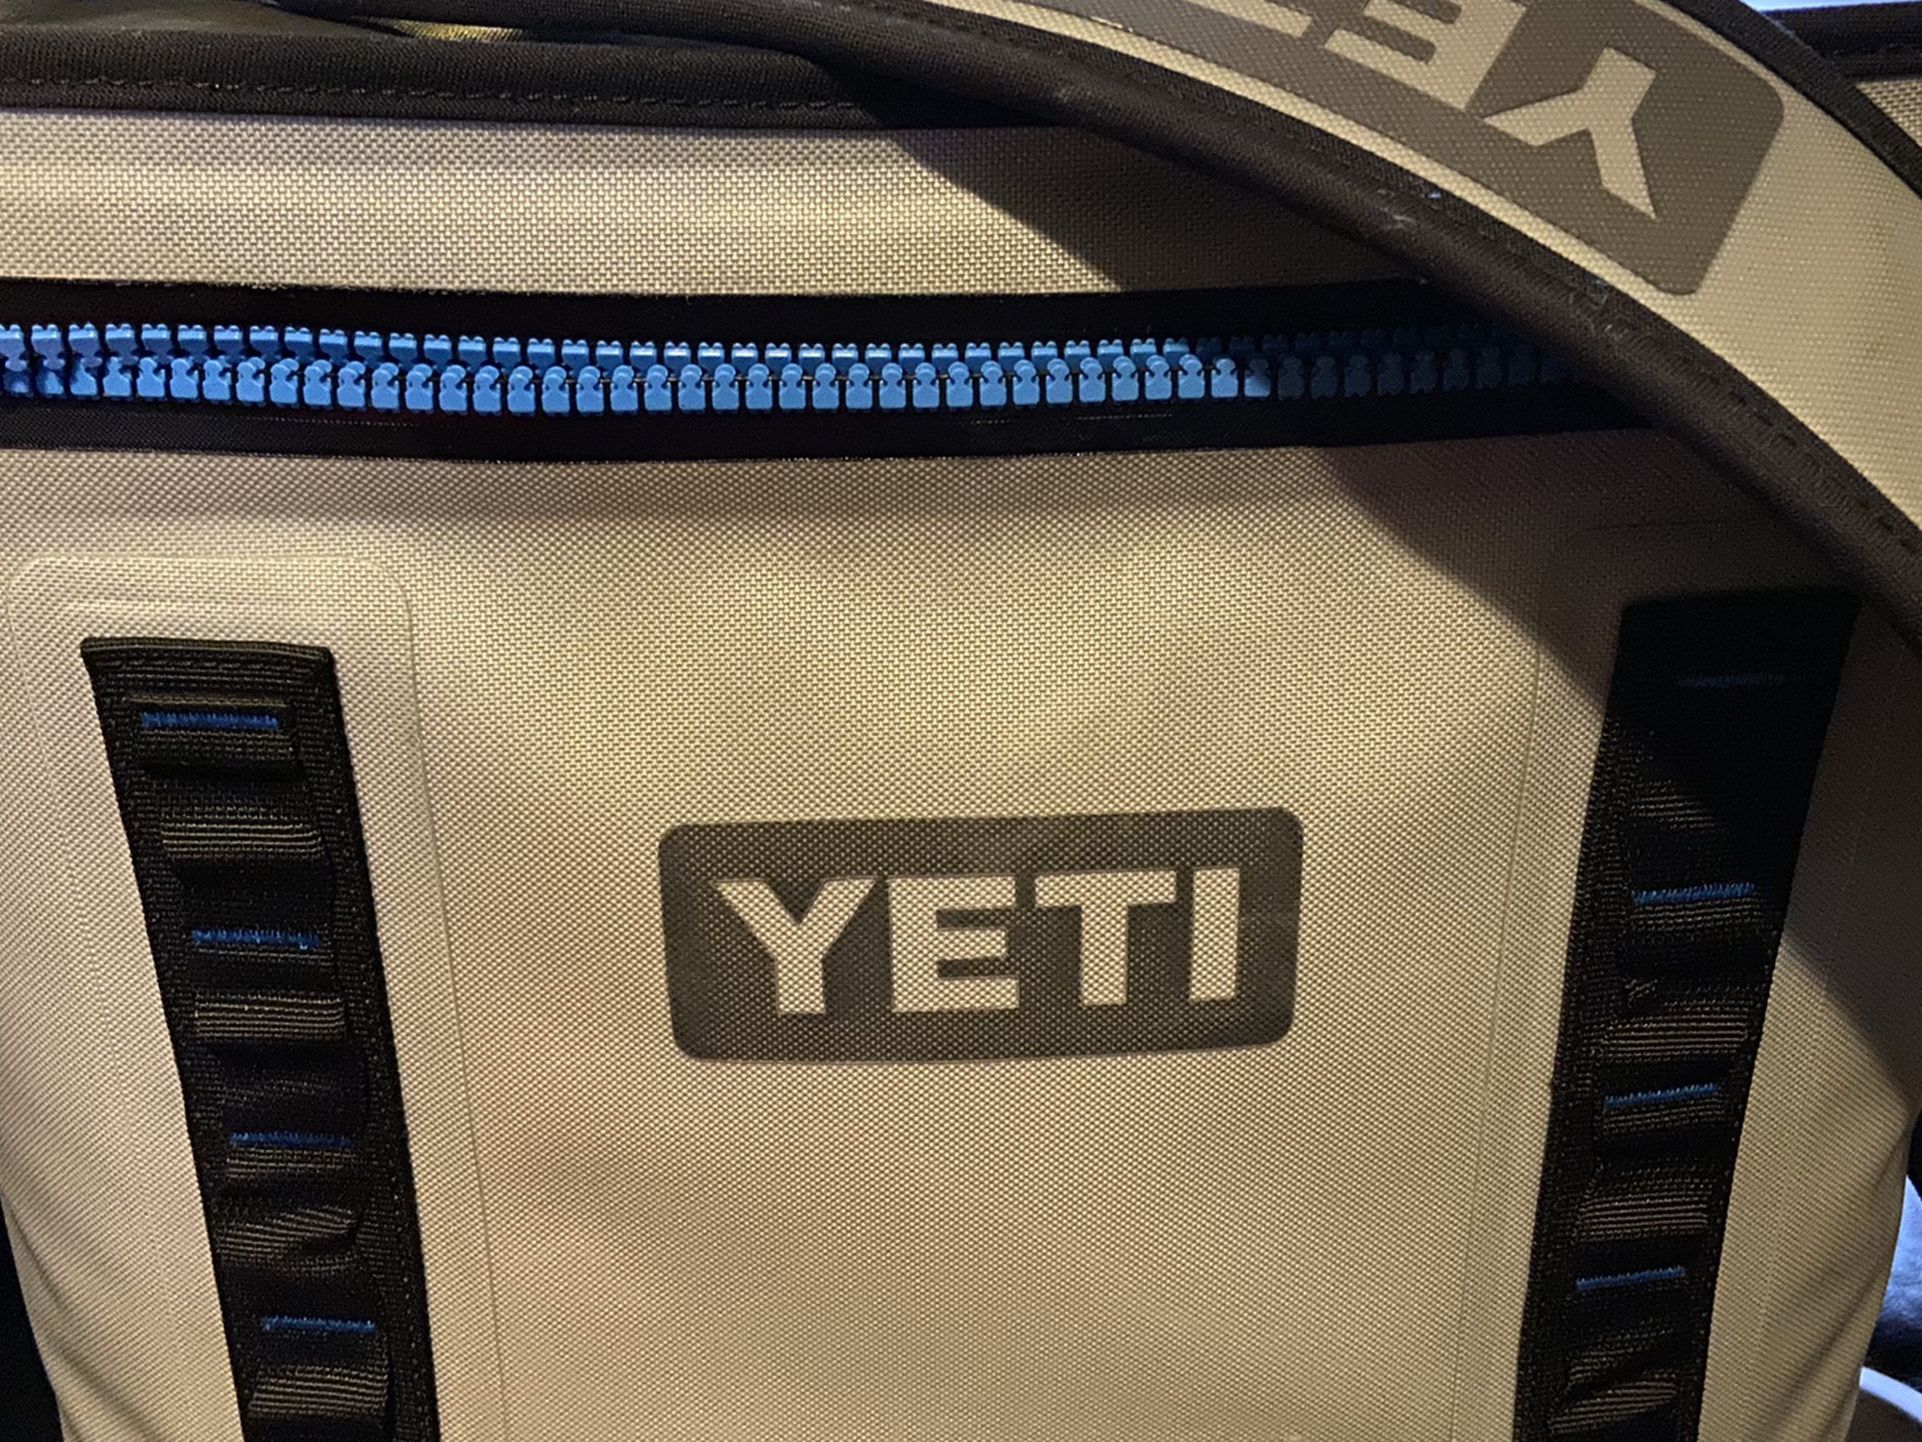 New YETI Hopper Flip 18 Soft Cooler. Cleaning out woman cave. Pu off Higley/Warner. Paid $320 for it- need gone grey and blue